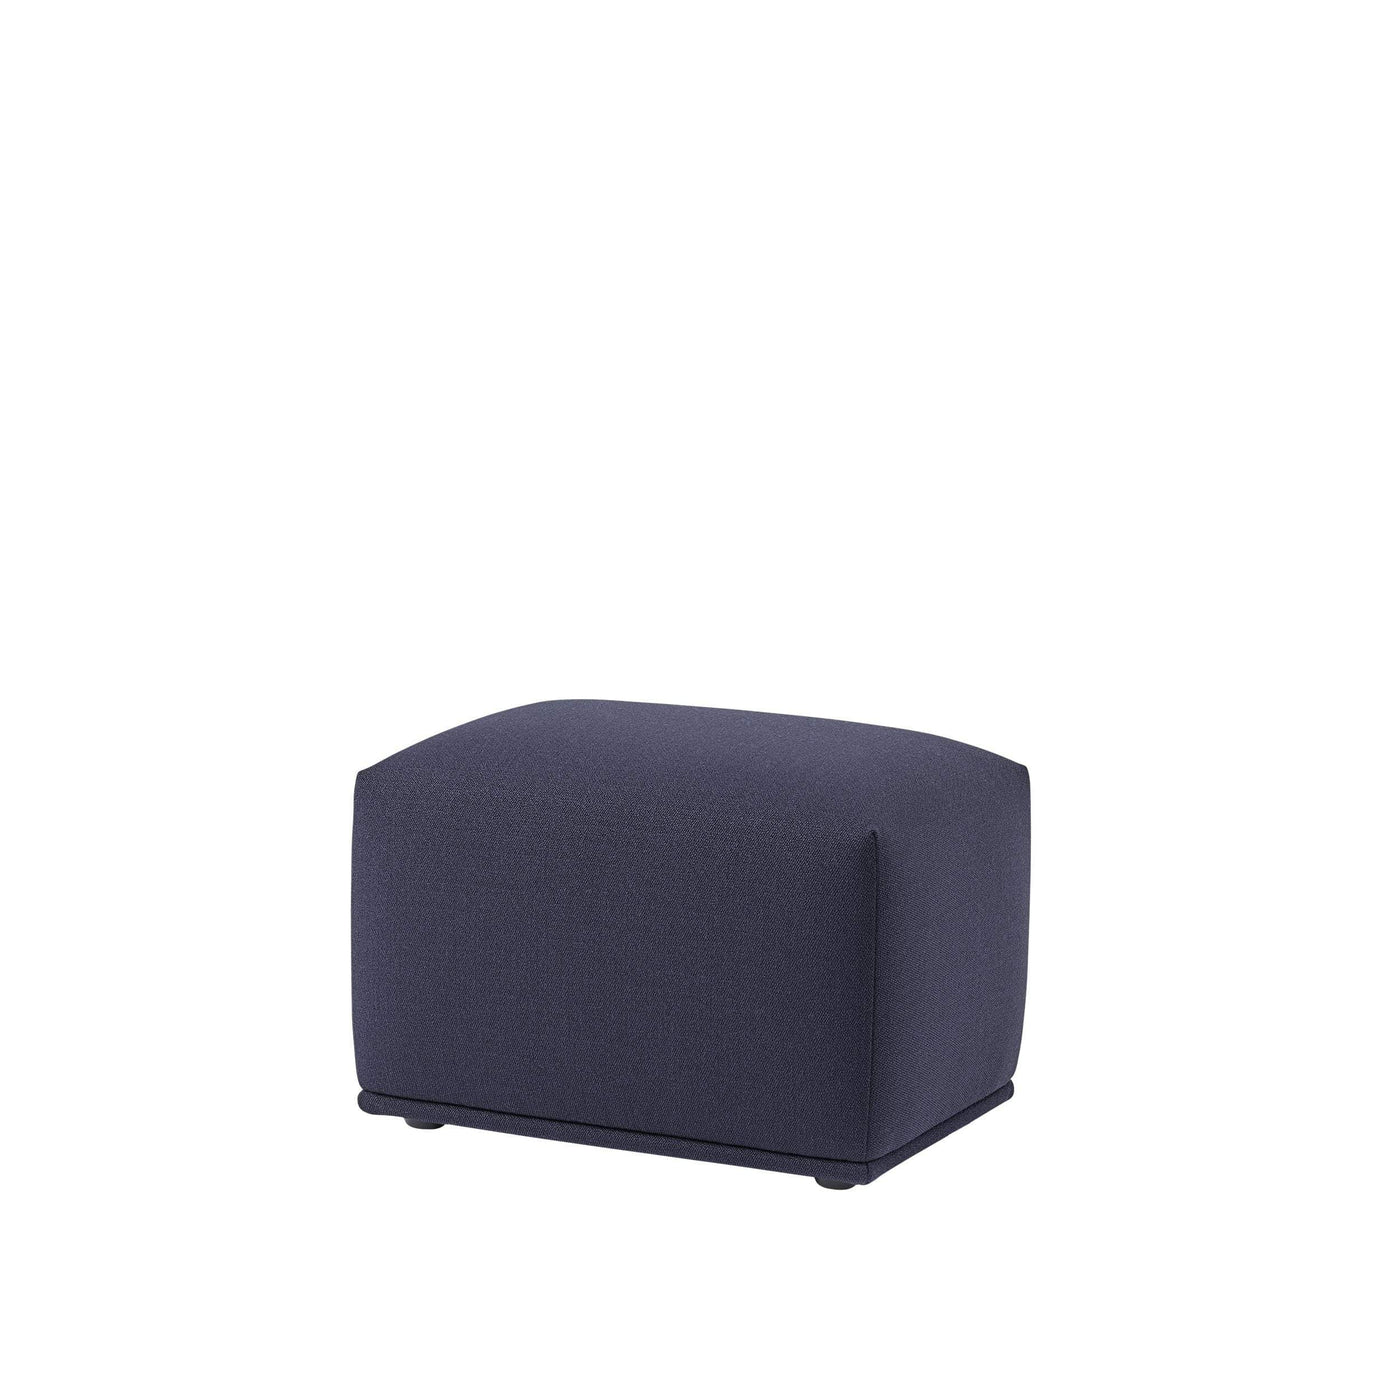 Vidar 554 by Kvadrat/Raf Simons. Blue upholstery wool fabric made to order for Muuto In Situ & Outline sofas & the Echo pouf. Order free fabric swatches at someday designs. 